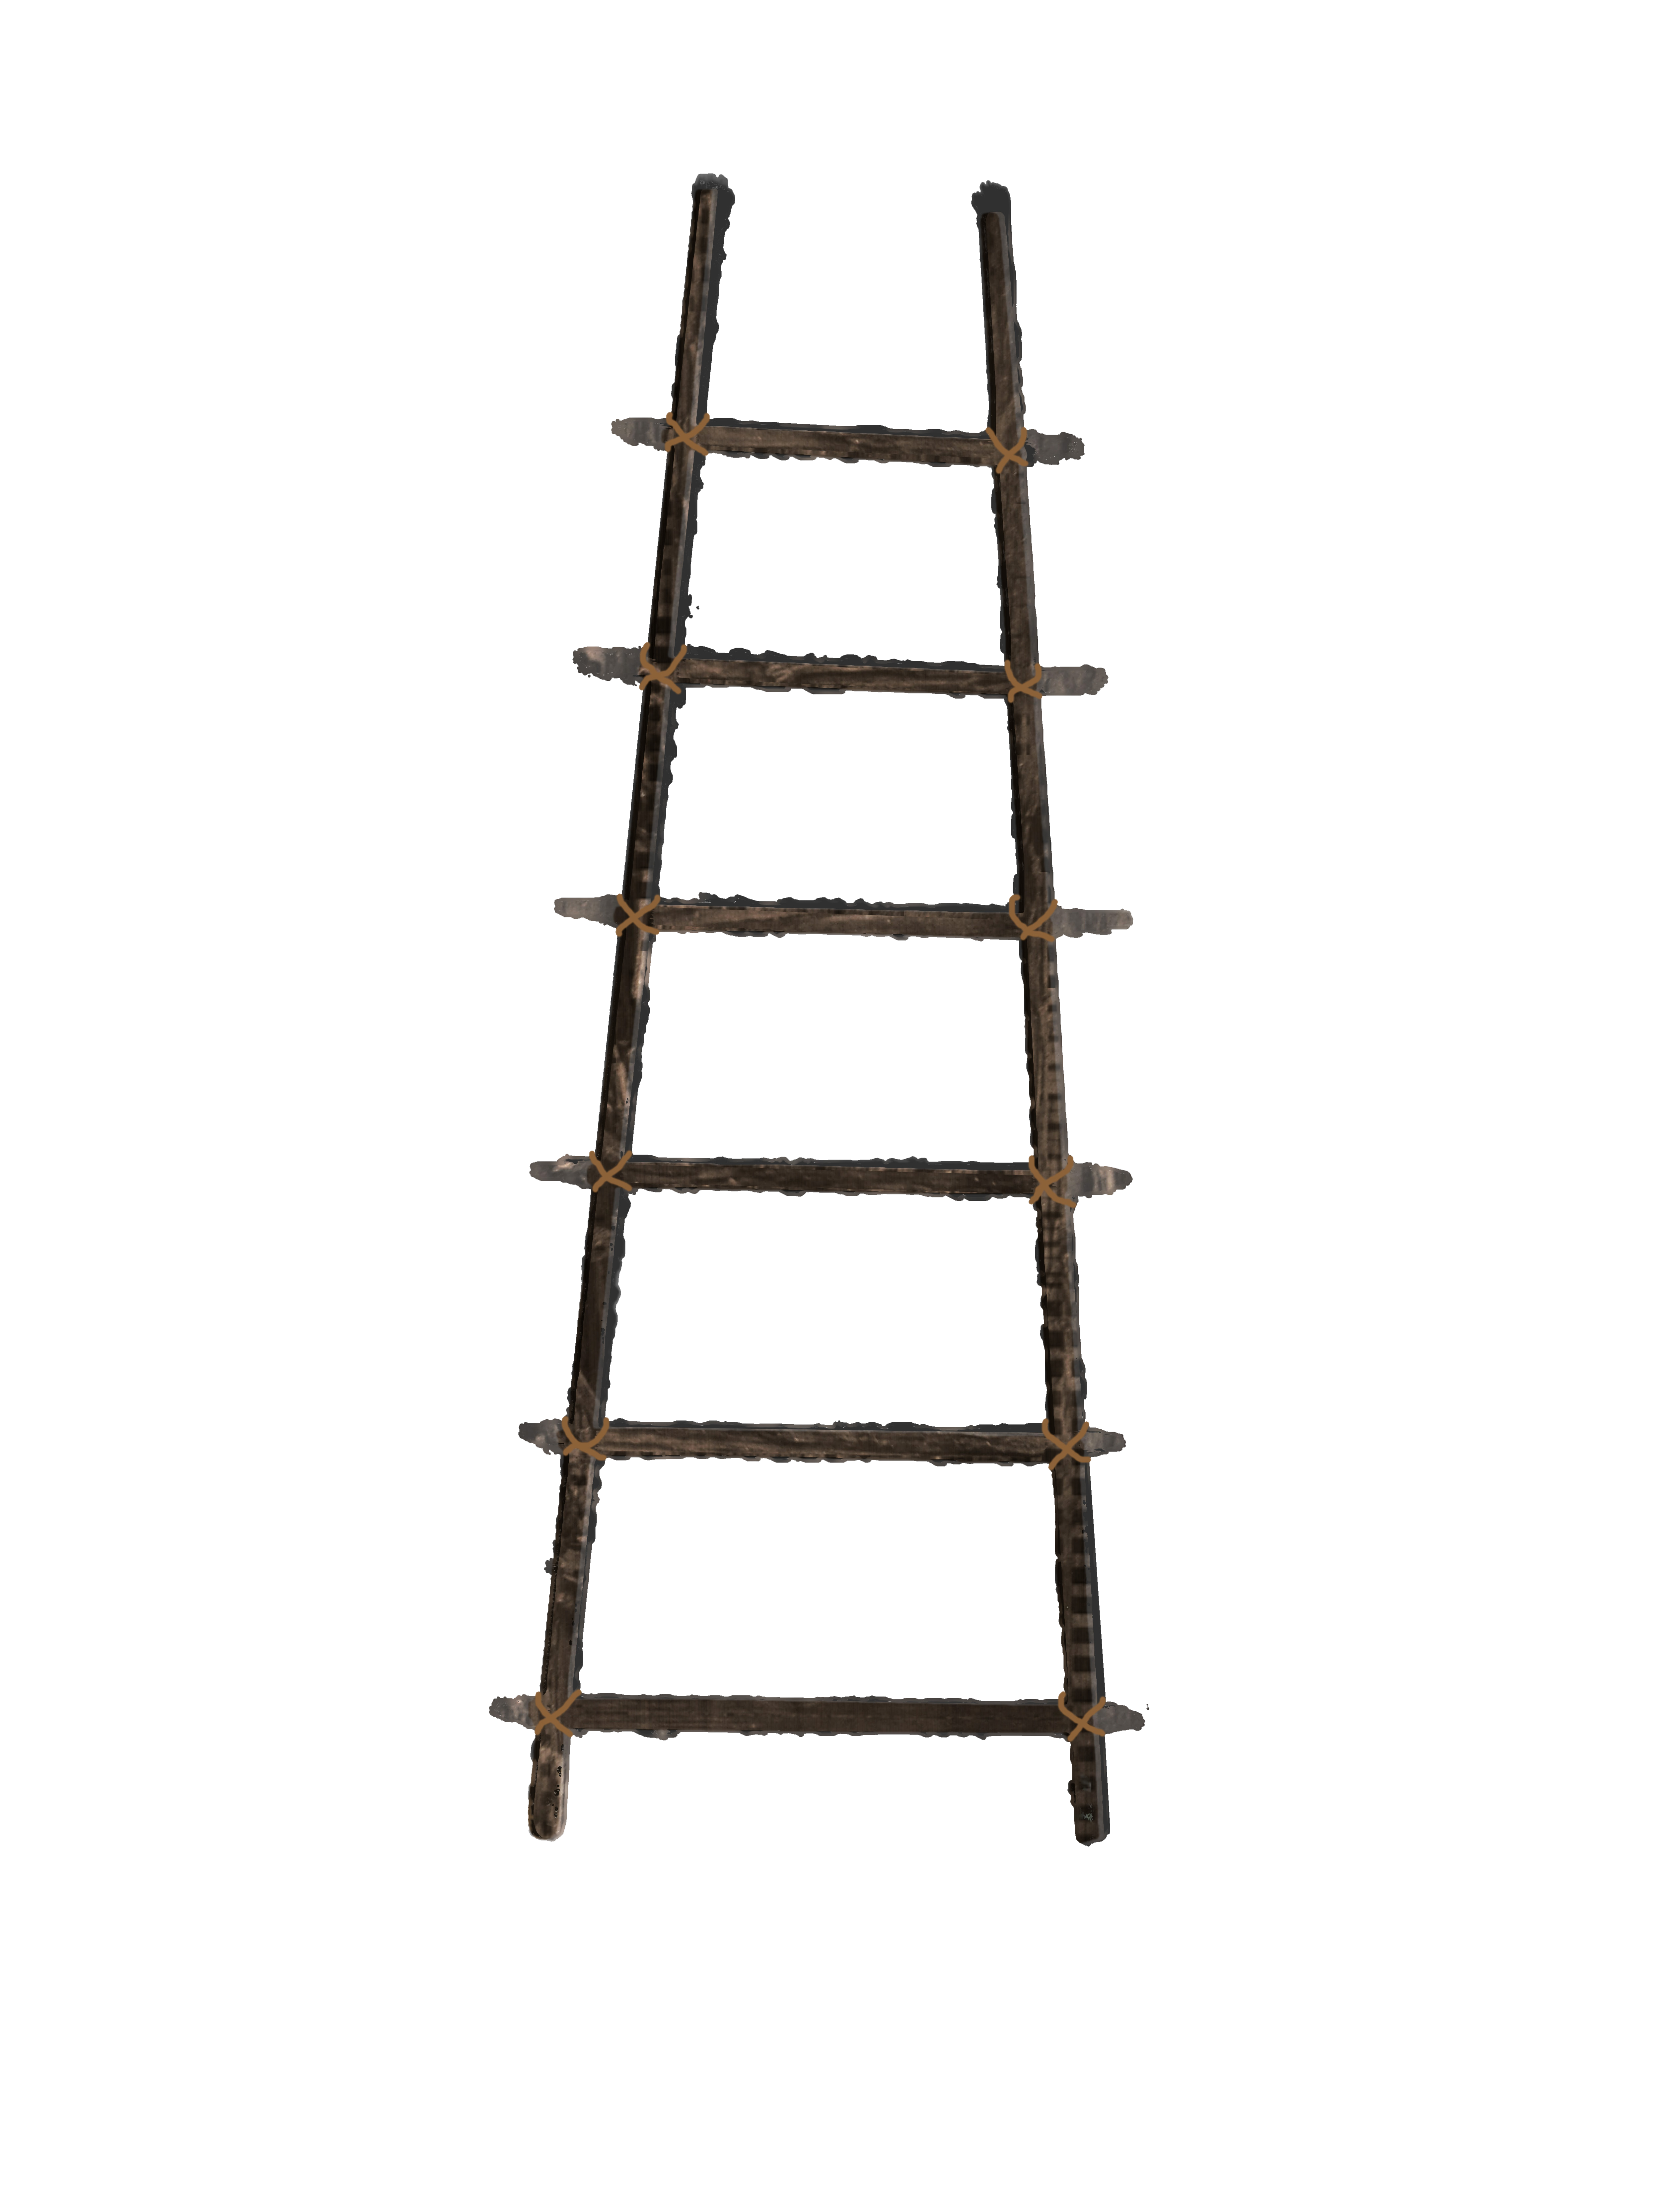 Old Wooden Ladder PNG Stock with ROPE LARGE by annamae22 on DeviantArt